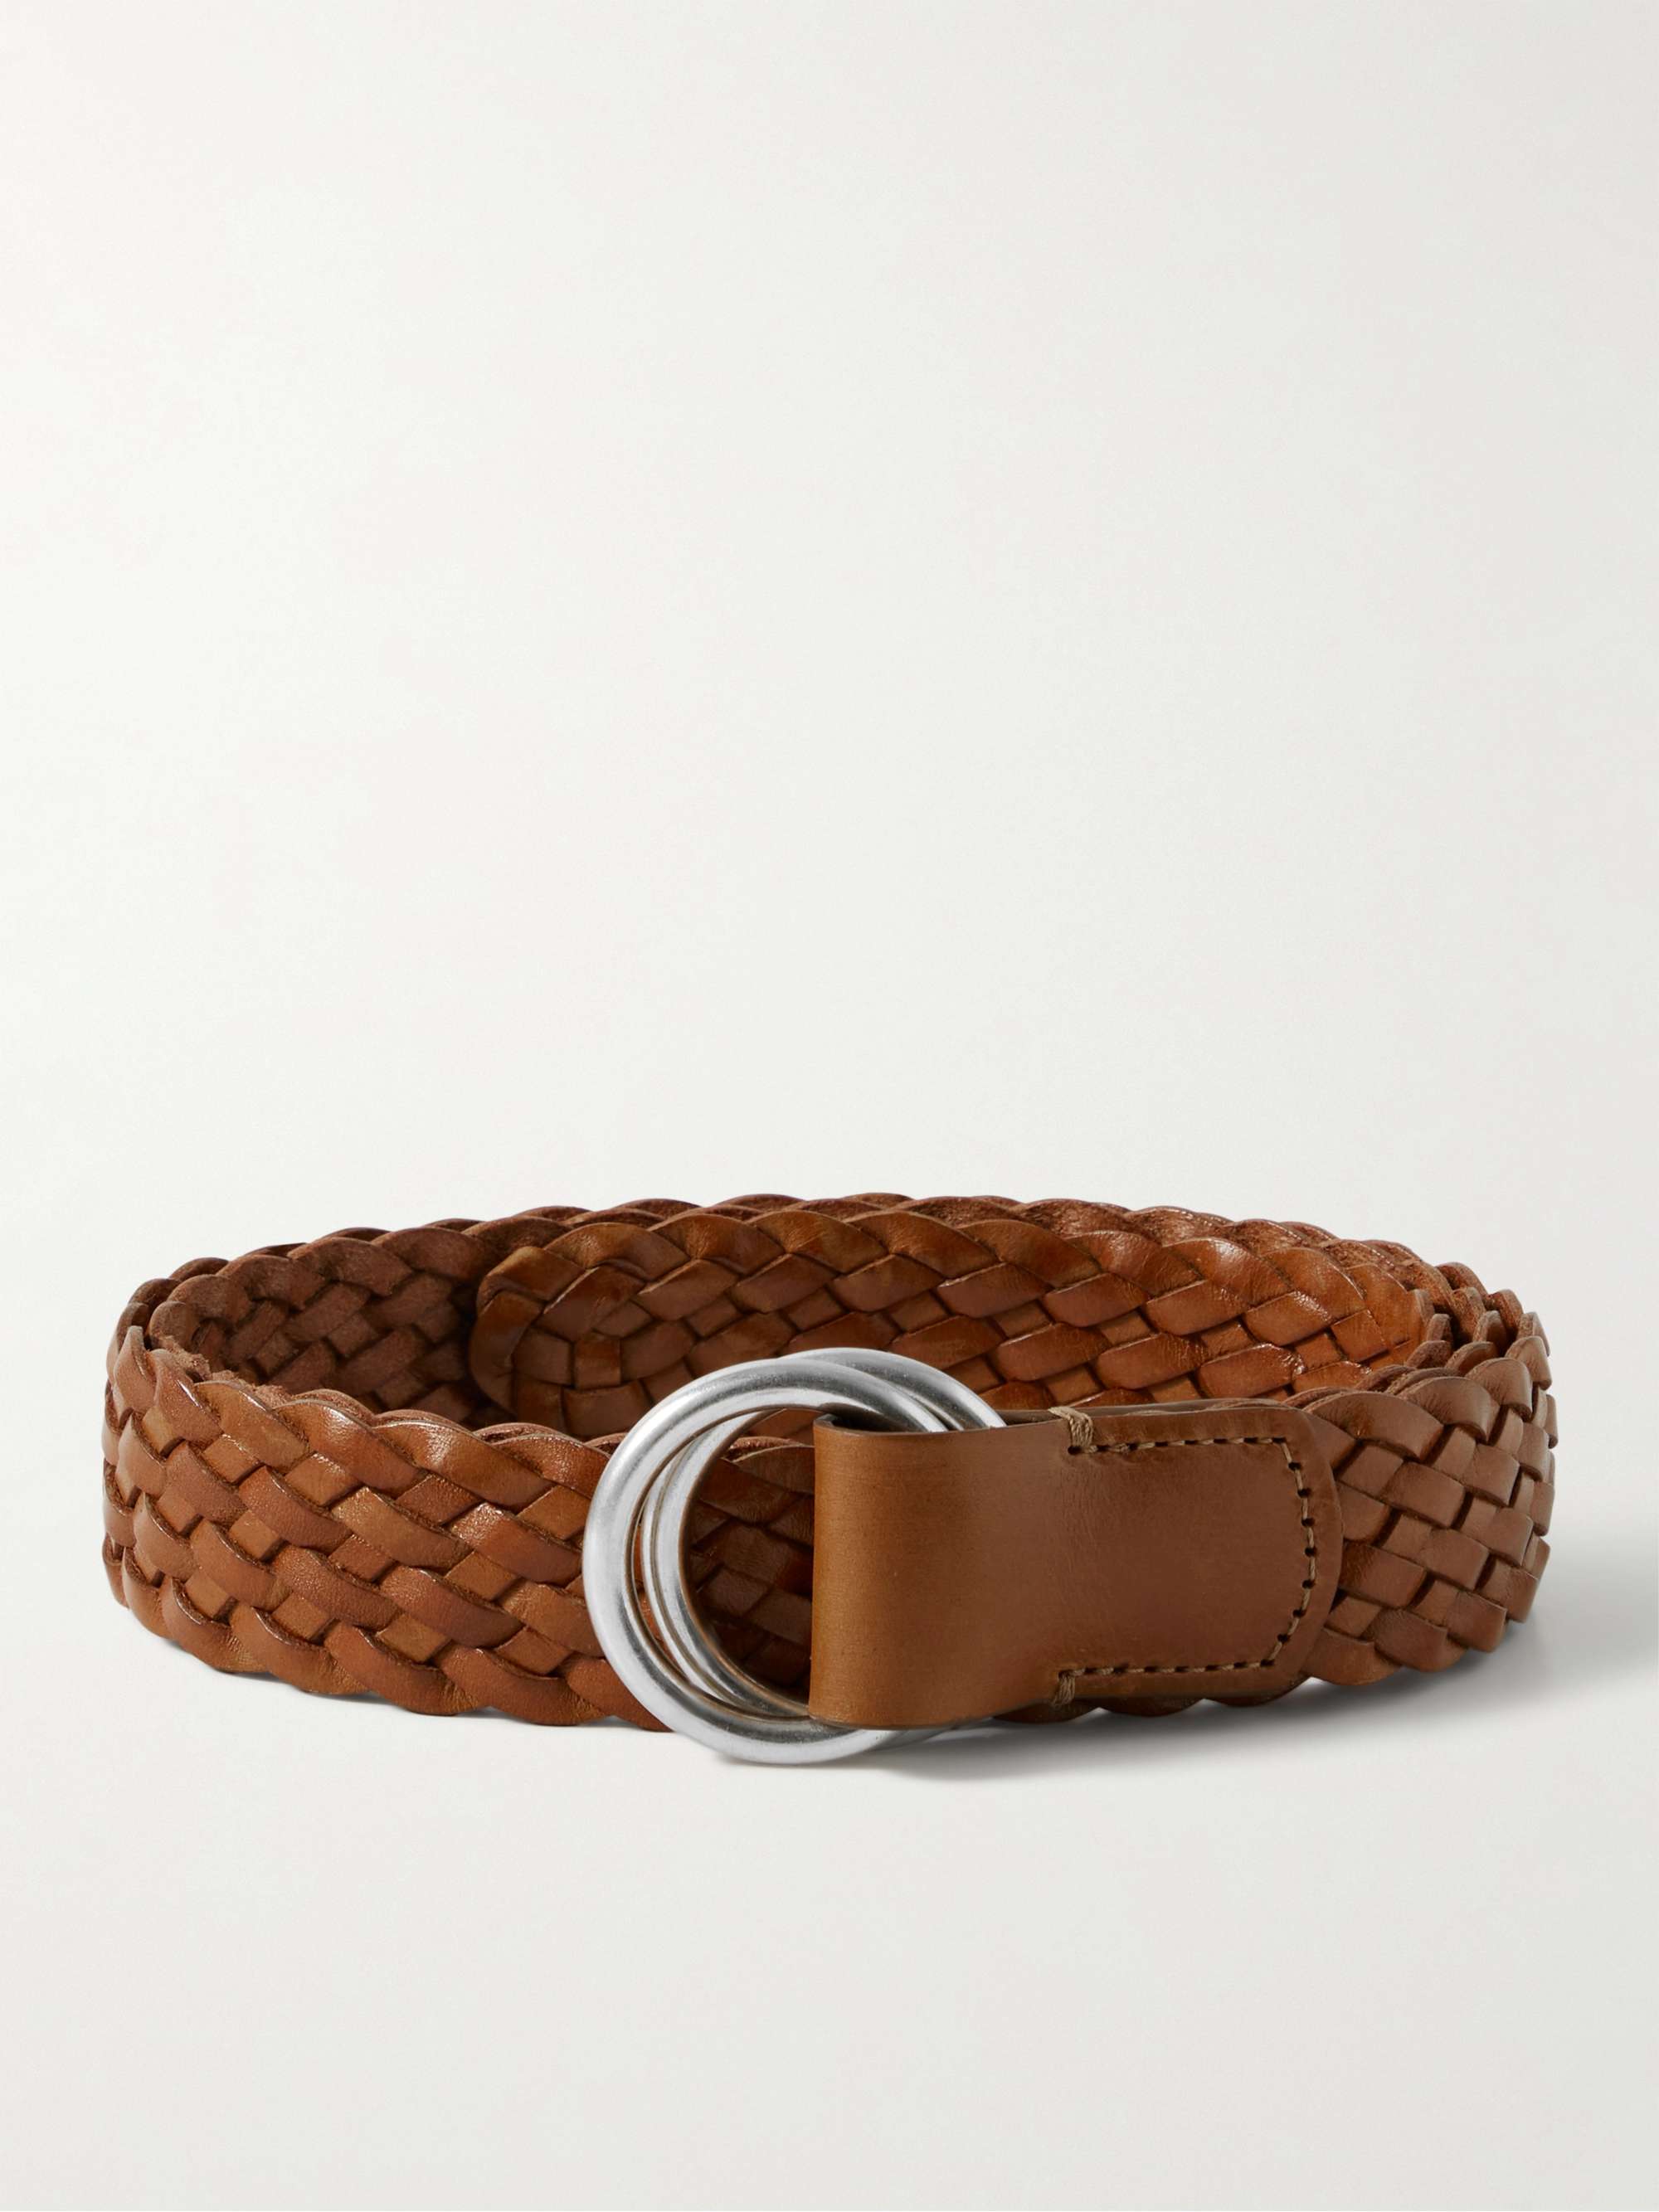 ANDERSON'S 3cm Woven Leather Belt